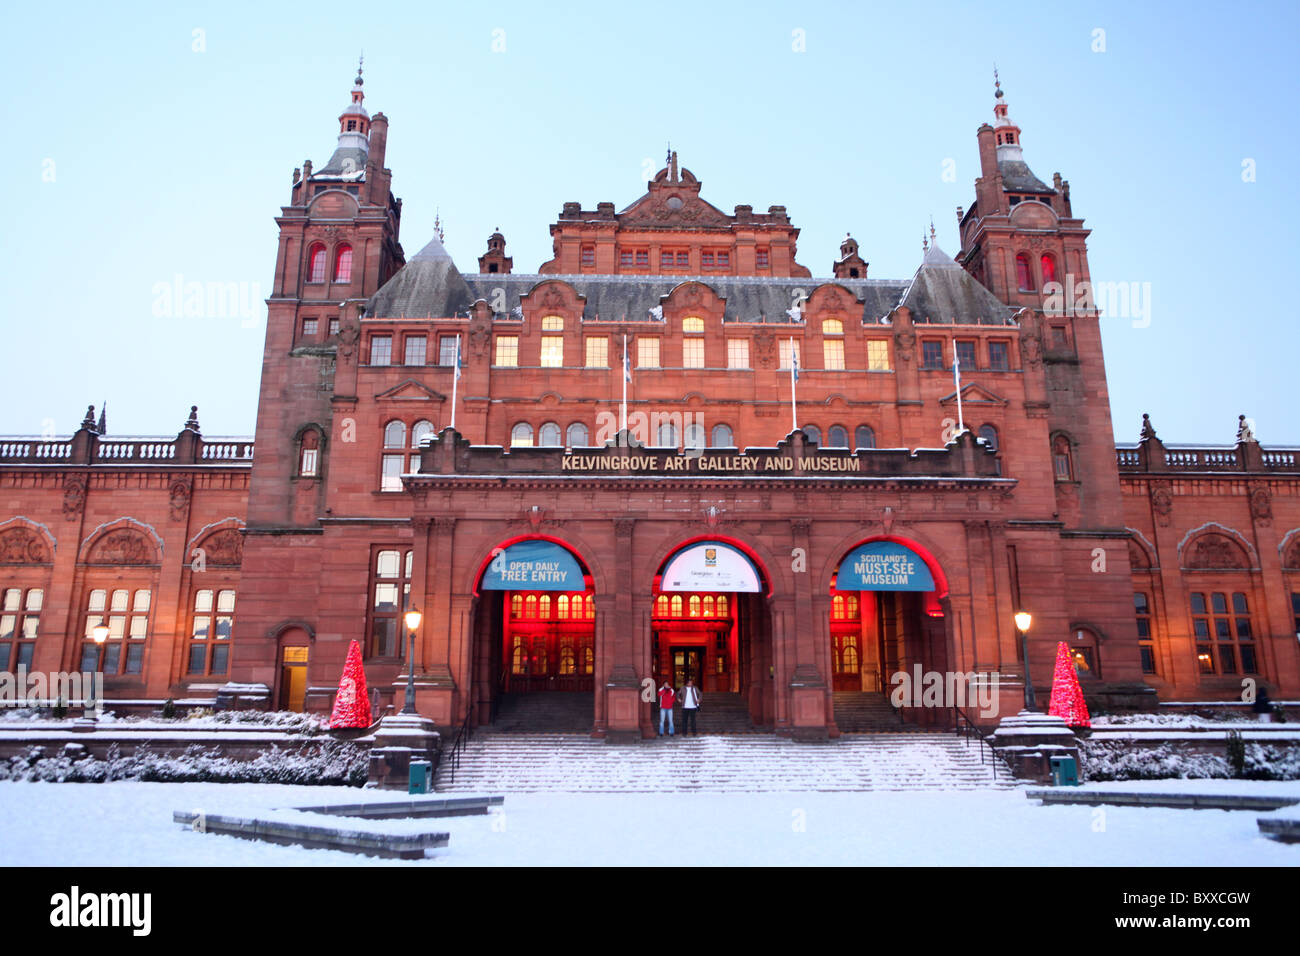 A winter scene of the Kelvingrove Art Gallery and Museum in Glasgow, Scotland. Stock Photo